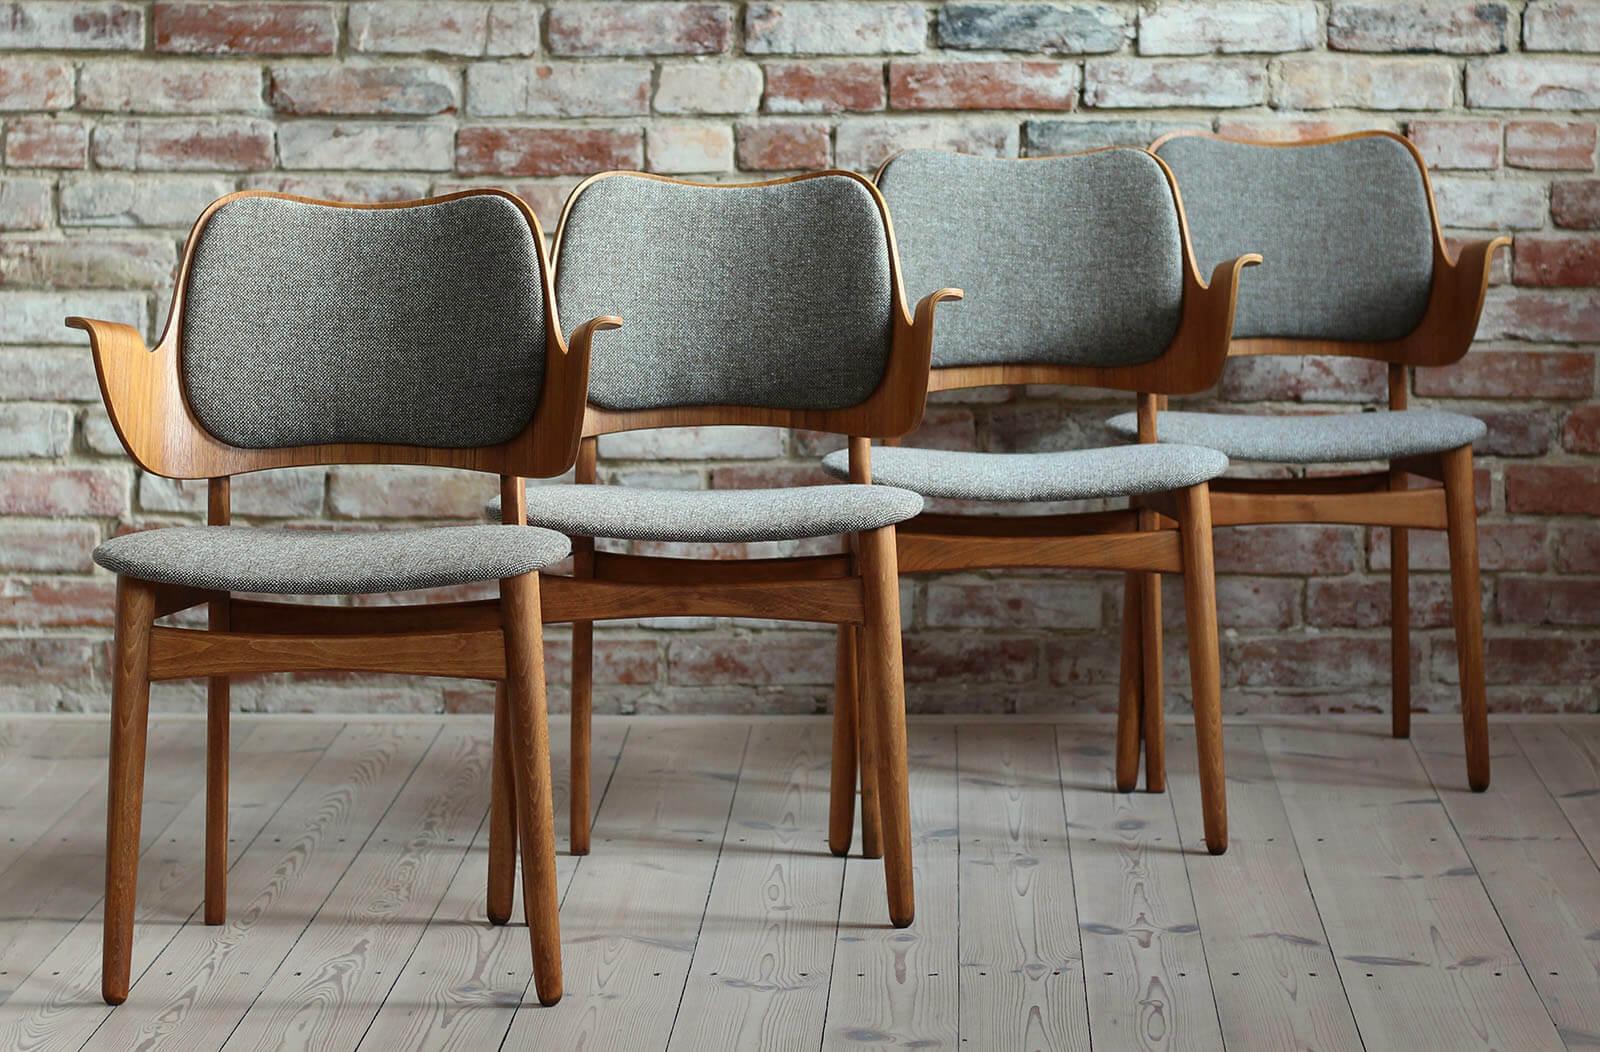 This set of four vintage dining chairs was designed by Danish designer Hans Olsen in the 1960s and produced by Bramin manufactory. The chairs have been completely restored finished with high-quality oil that gave them beautiful and natural finish.